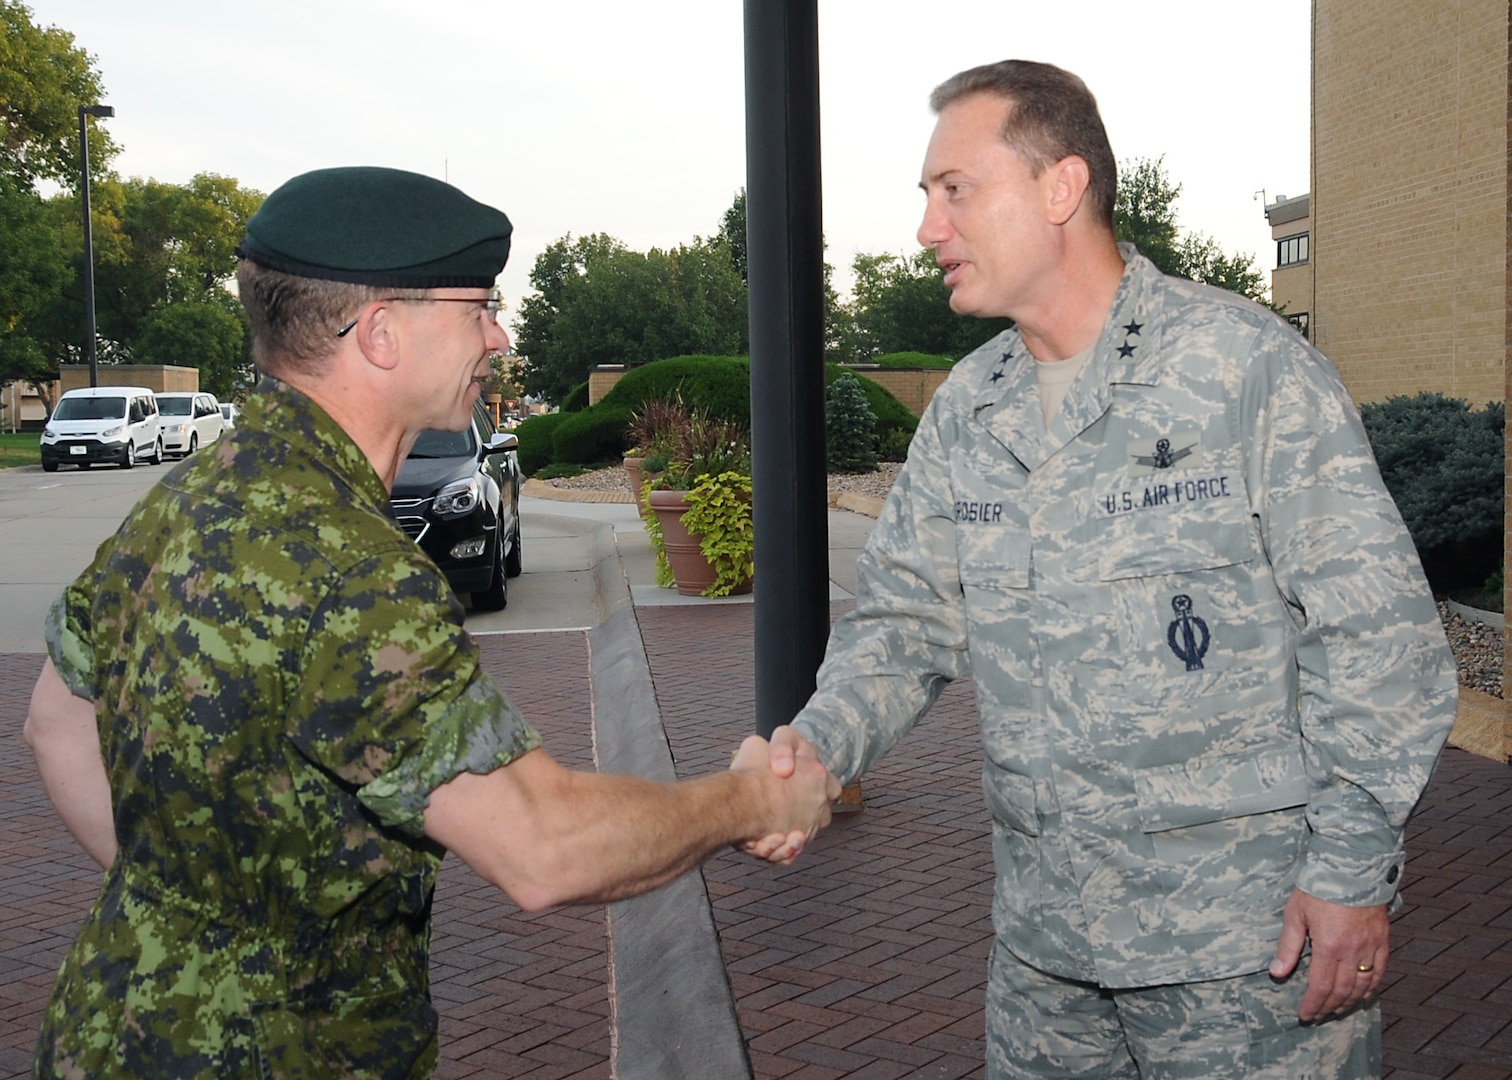 Maj. Gen. Charles Lamarre (left), Canadian Armed Forces Strategic Joint Staff director of staff, is greeted by Maj. Gen. Clinton E. Crosier, U.S. Strategic Command (USSTRATCOM) director of plans and policy, in front of USSTRATCOM headquarters, Offutt Air Force Base, Neb., Sept. 21, 2016. During his visit, Lamarre participated in discussions with USSTRATCOM leaders and subject matter experts on topics of mutual interest between the Canadian Department of National Defence and the Department of Defense. Lamarre also met with Adm. Cecil D. Haney, USSTRATCOM commander, and attended a series of briefings on the commandâ€™s global strategic missions. One of nine DoD unified combatant commands, USSTRATCOM has global strategic missions assigned through the Unified Command Plan that include strategic deterrence; space operations; cyberspace operations; joint electronic warfare; global strike; missile defense; intelligence, surveillance and reconnaissance; combating weapons of mass destruction; and analysis and targeting. (USSTRATCOM photo by Steve Cunningham)